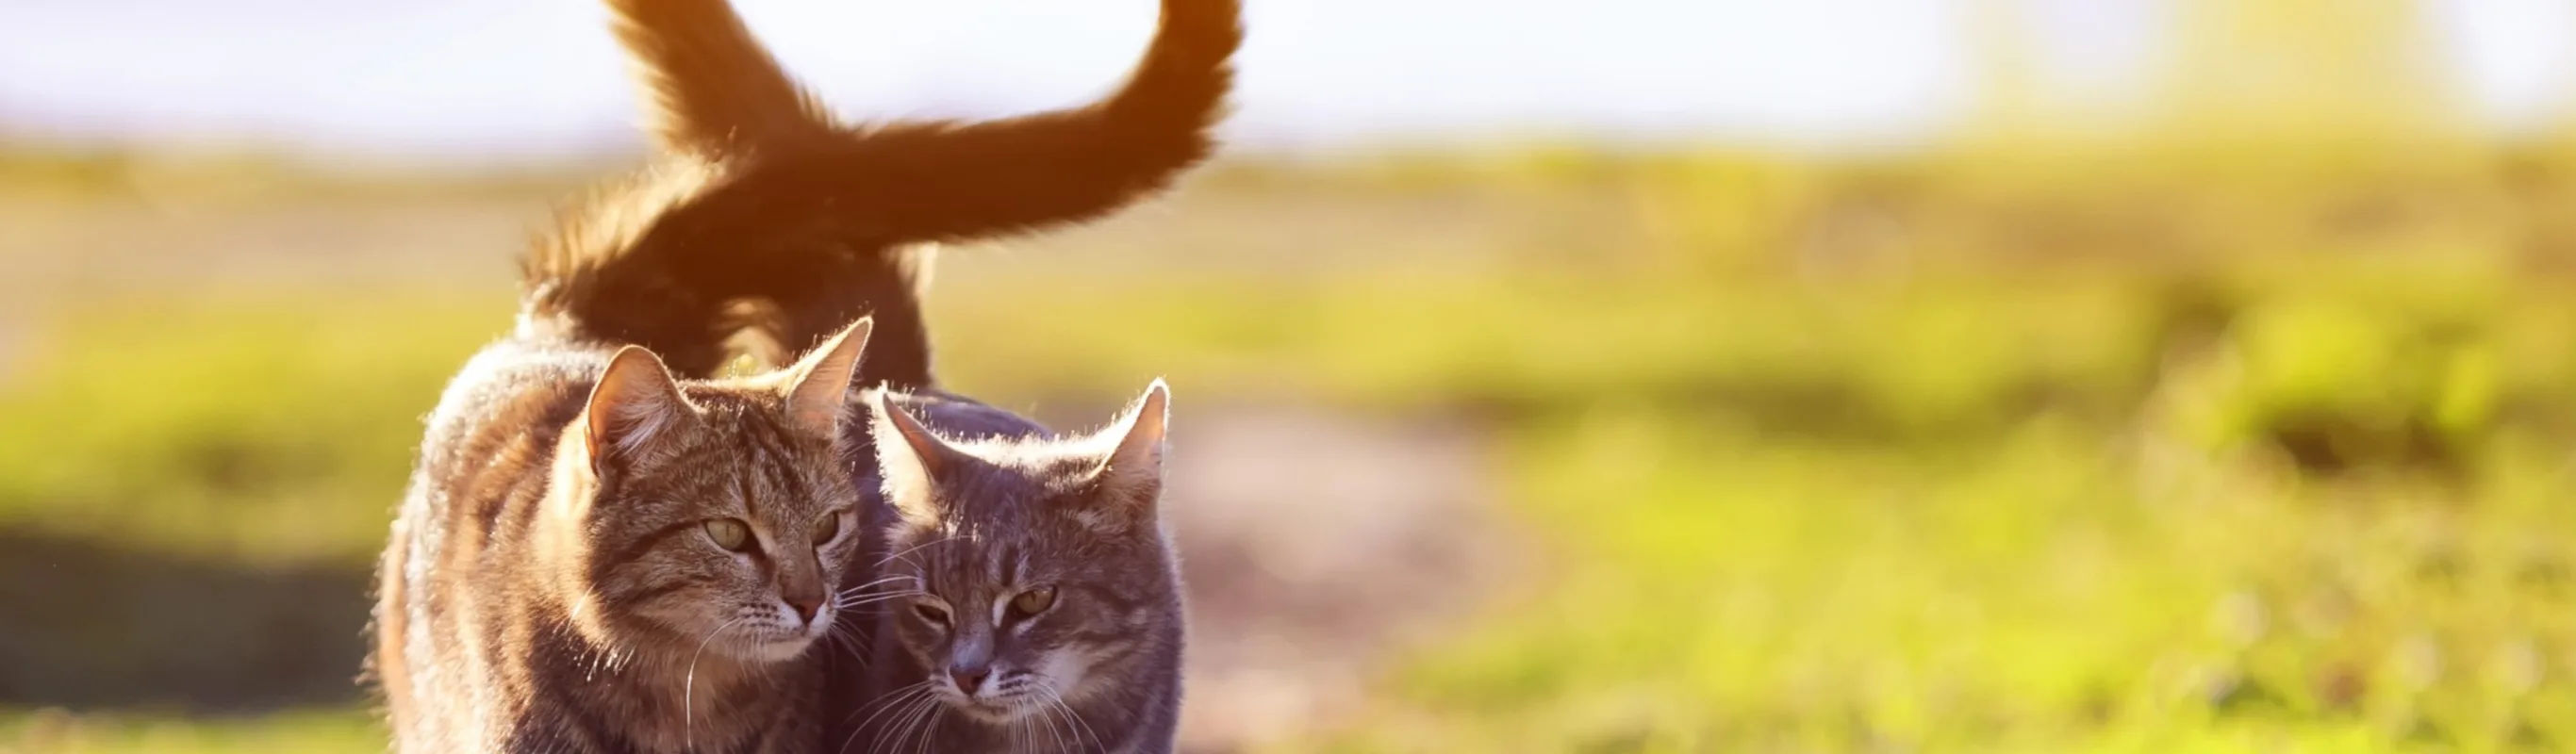 Cats walking together on path with tails linked in a heart shape